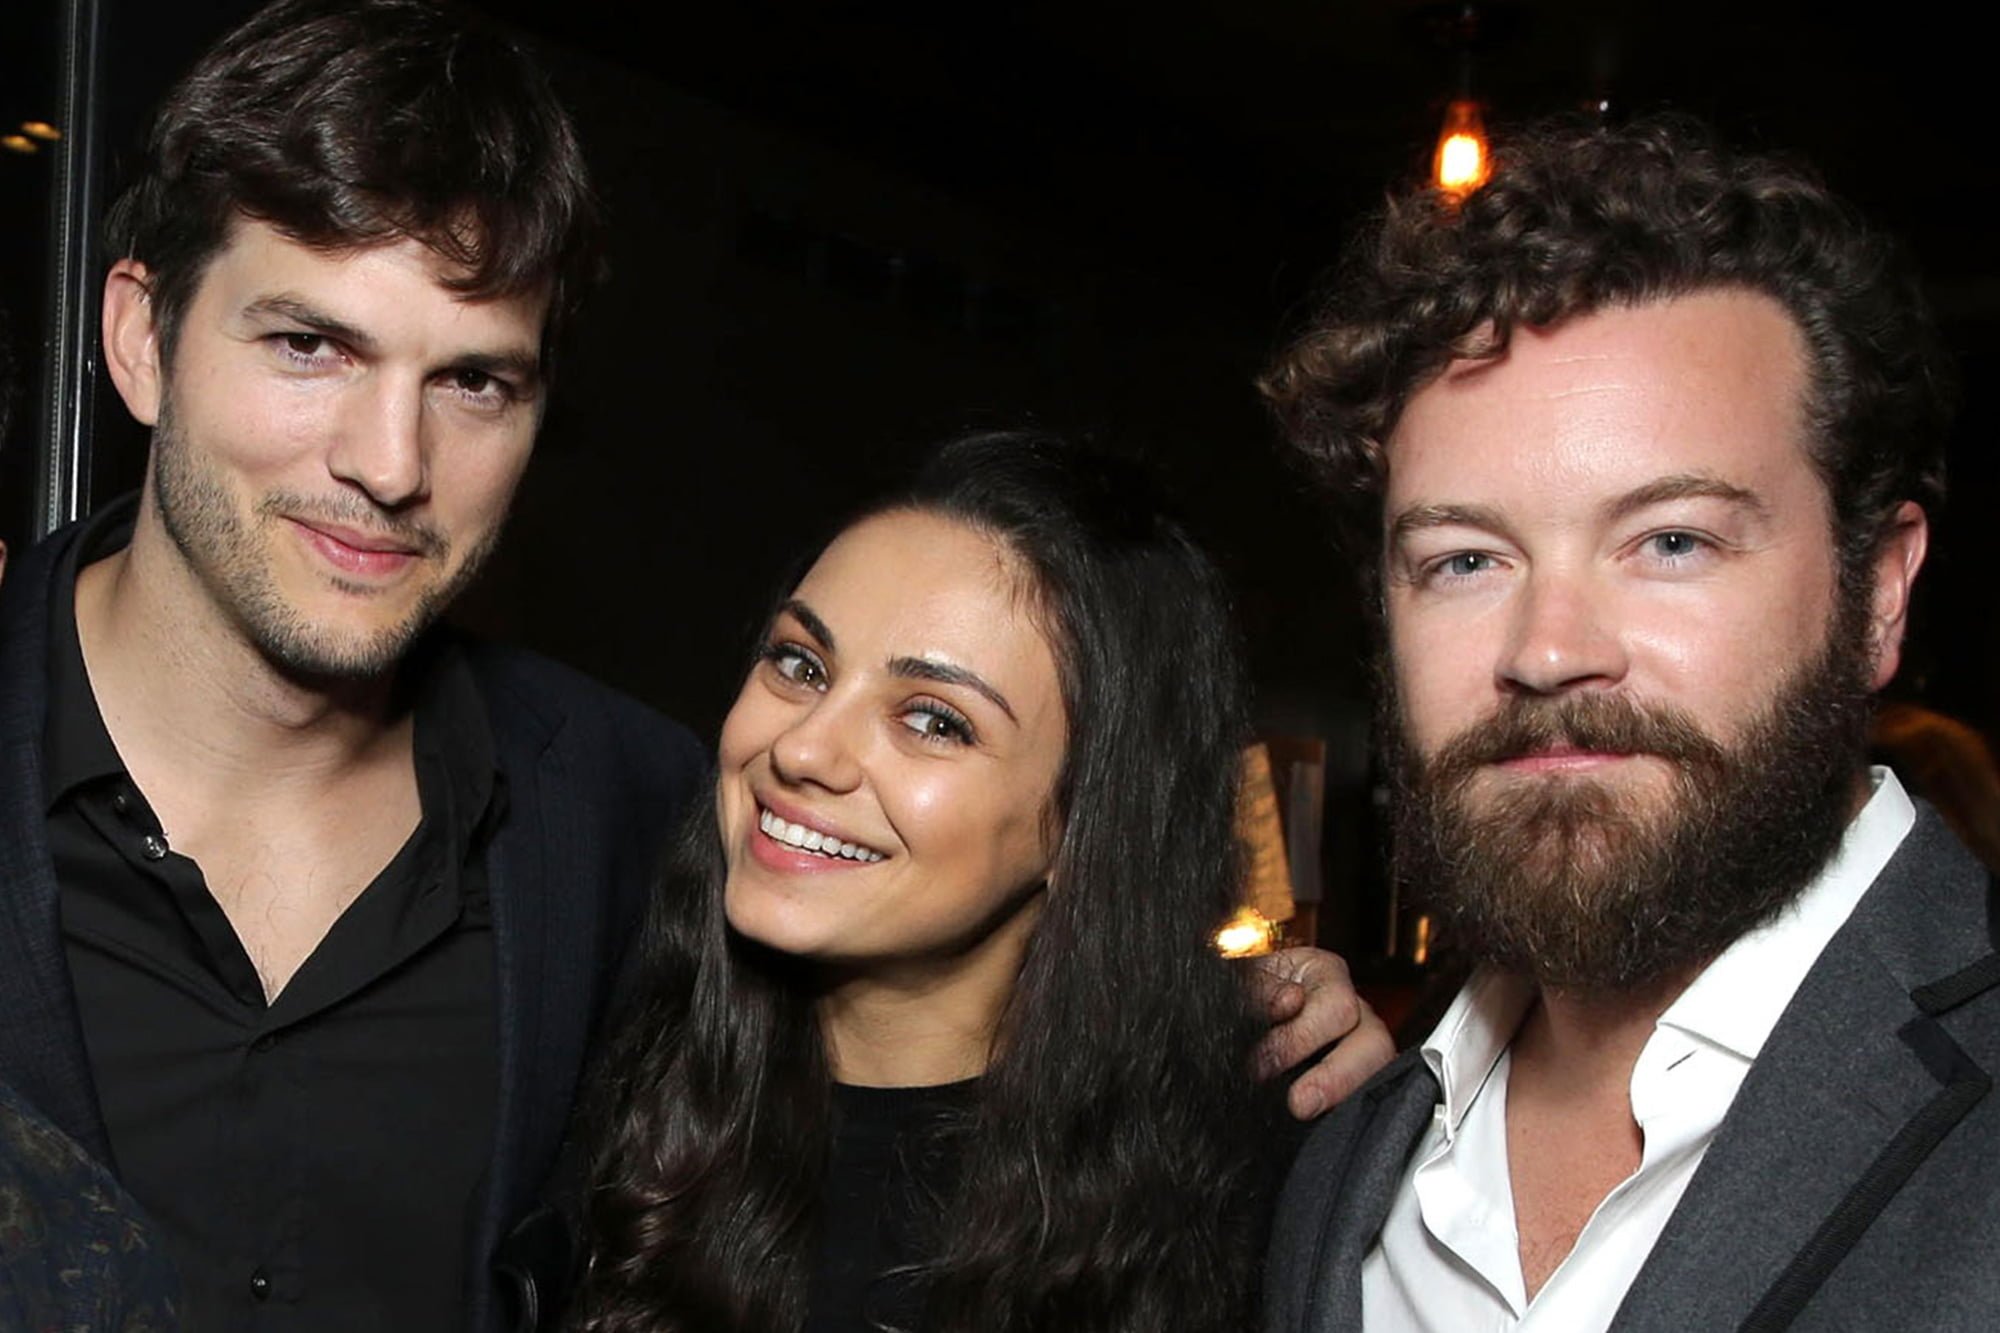 Mandatory Credit: Photo by Eric Charbonneau/Shutterstock (5619678c) Wilmer Valderrama, Ashton Kutcher, Mila Kunis and Danny Masterson 'The Ranch' Netflix TV series screening, After Party, Los Angeles, America - 28 Mar 2016